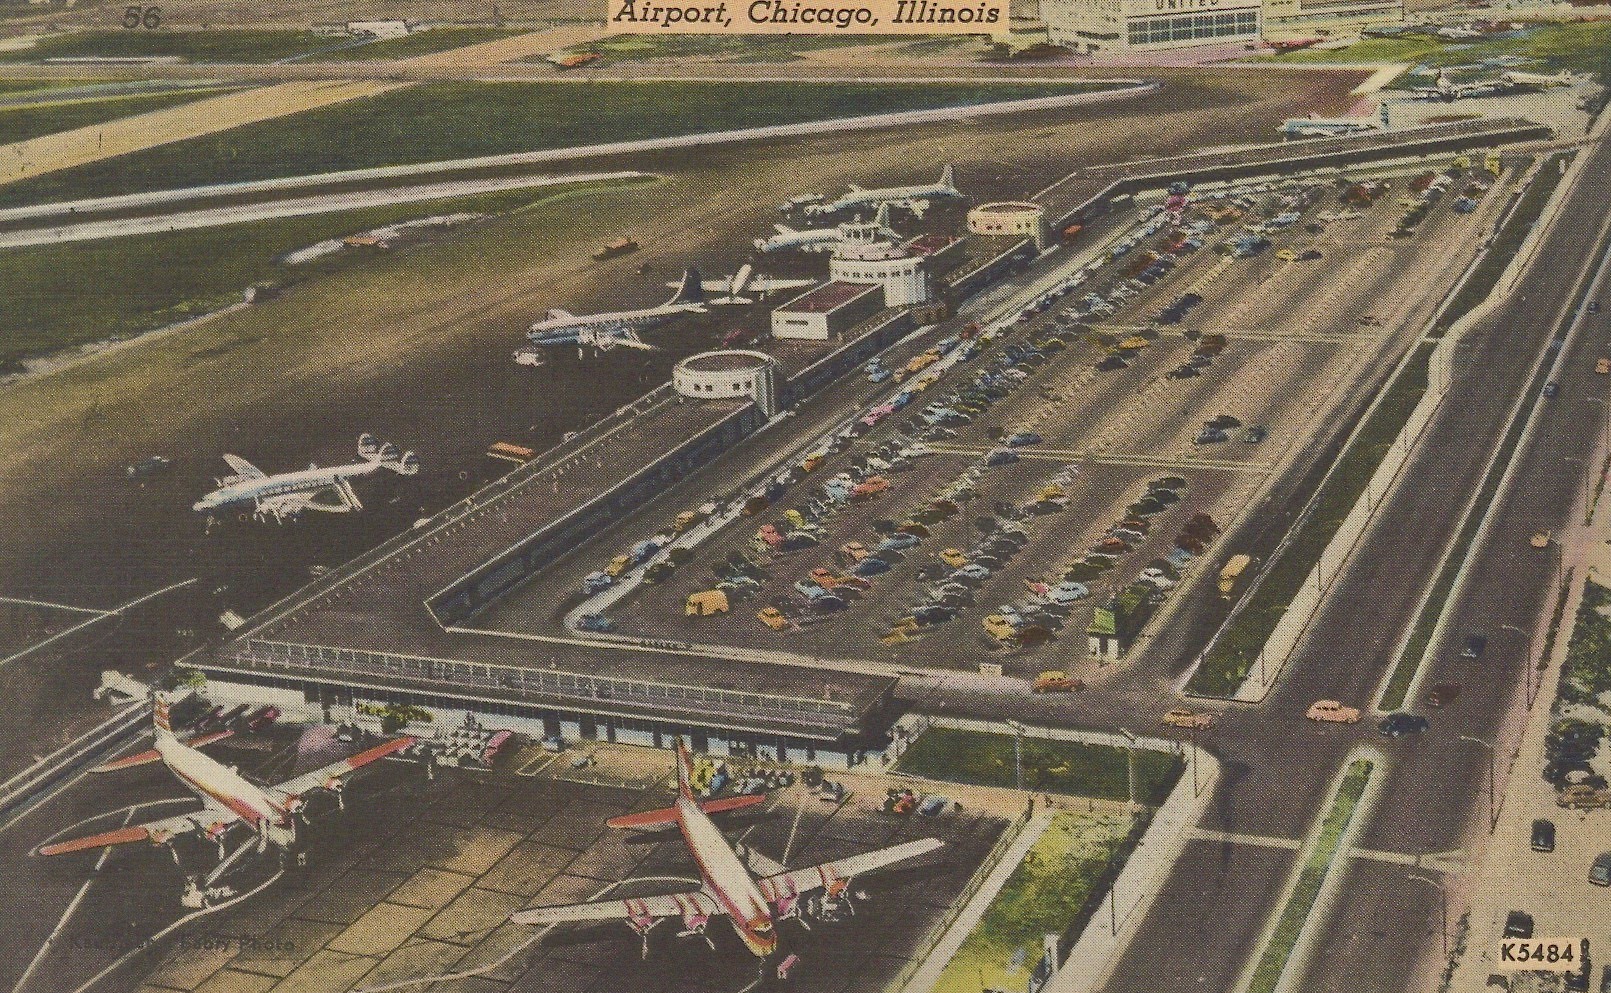 Chicago Midway Airport aerial view showing numerous propliners, 1950s